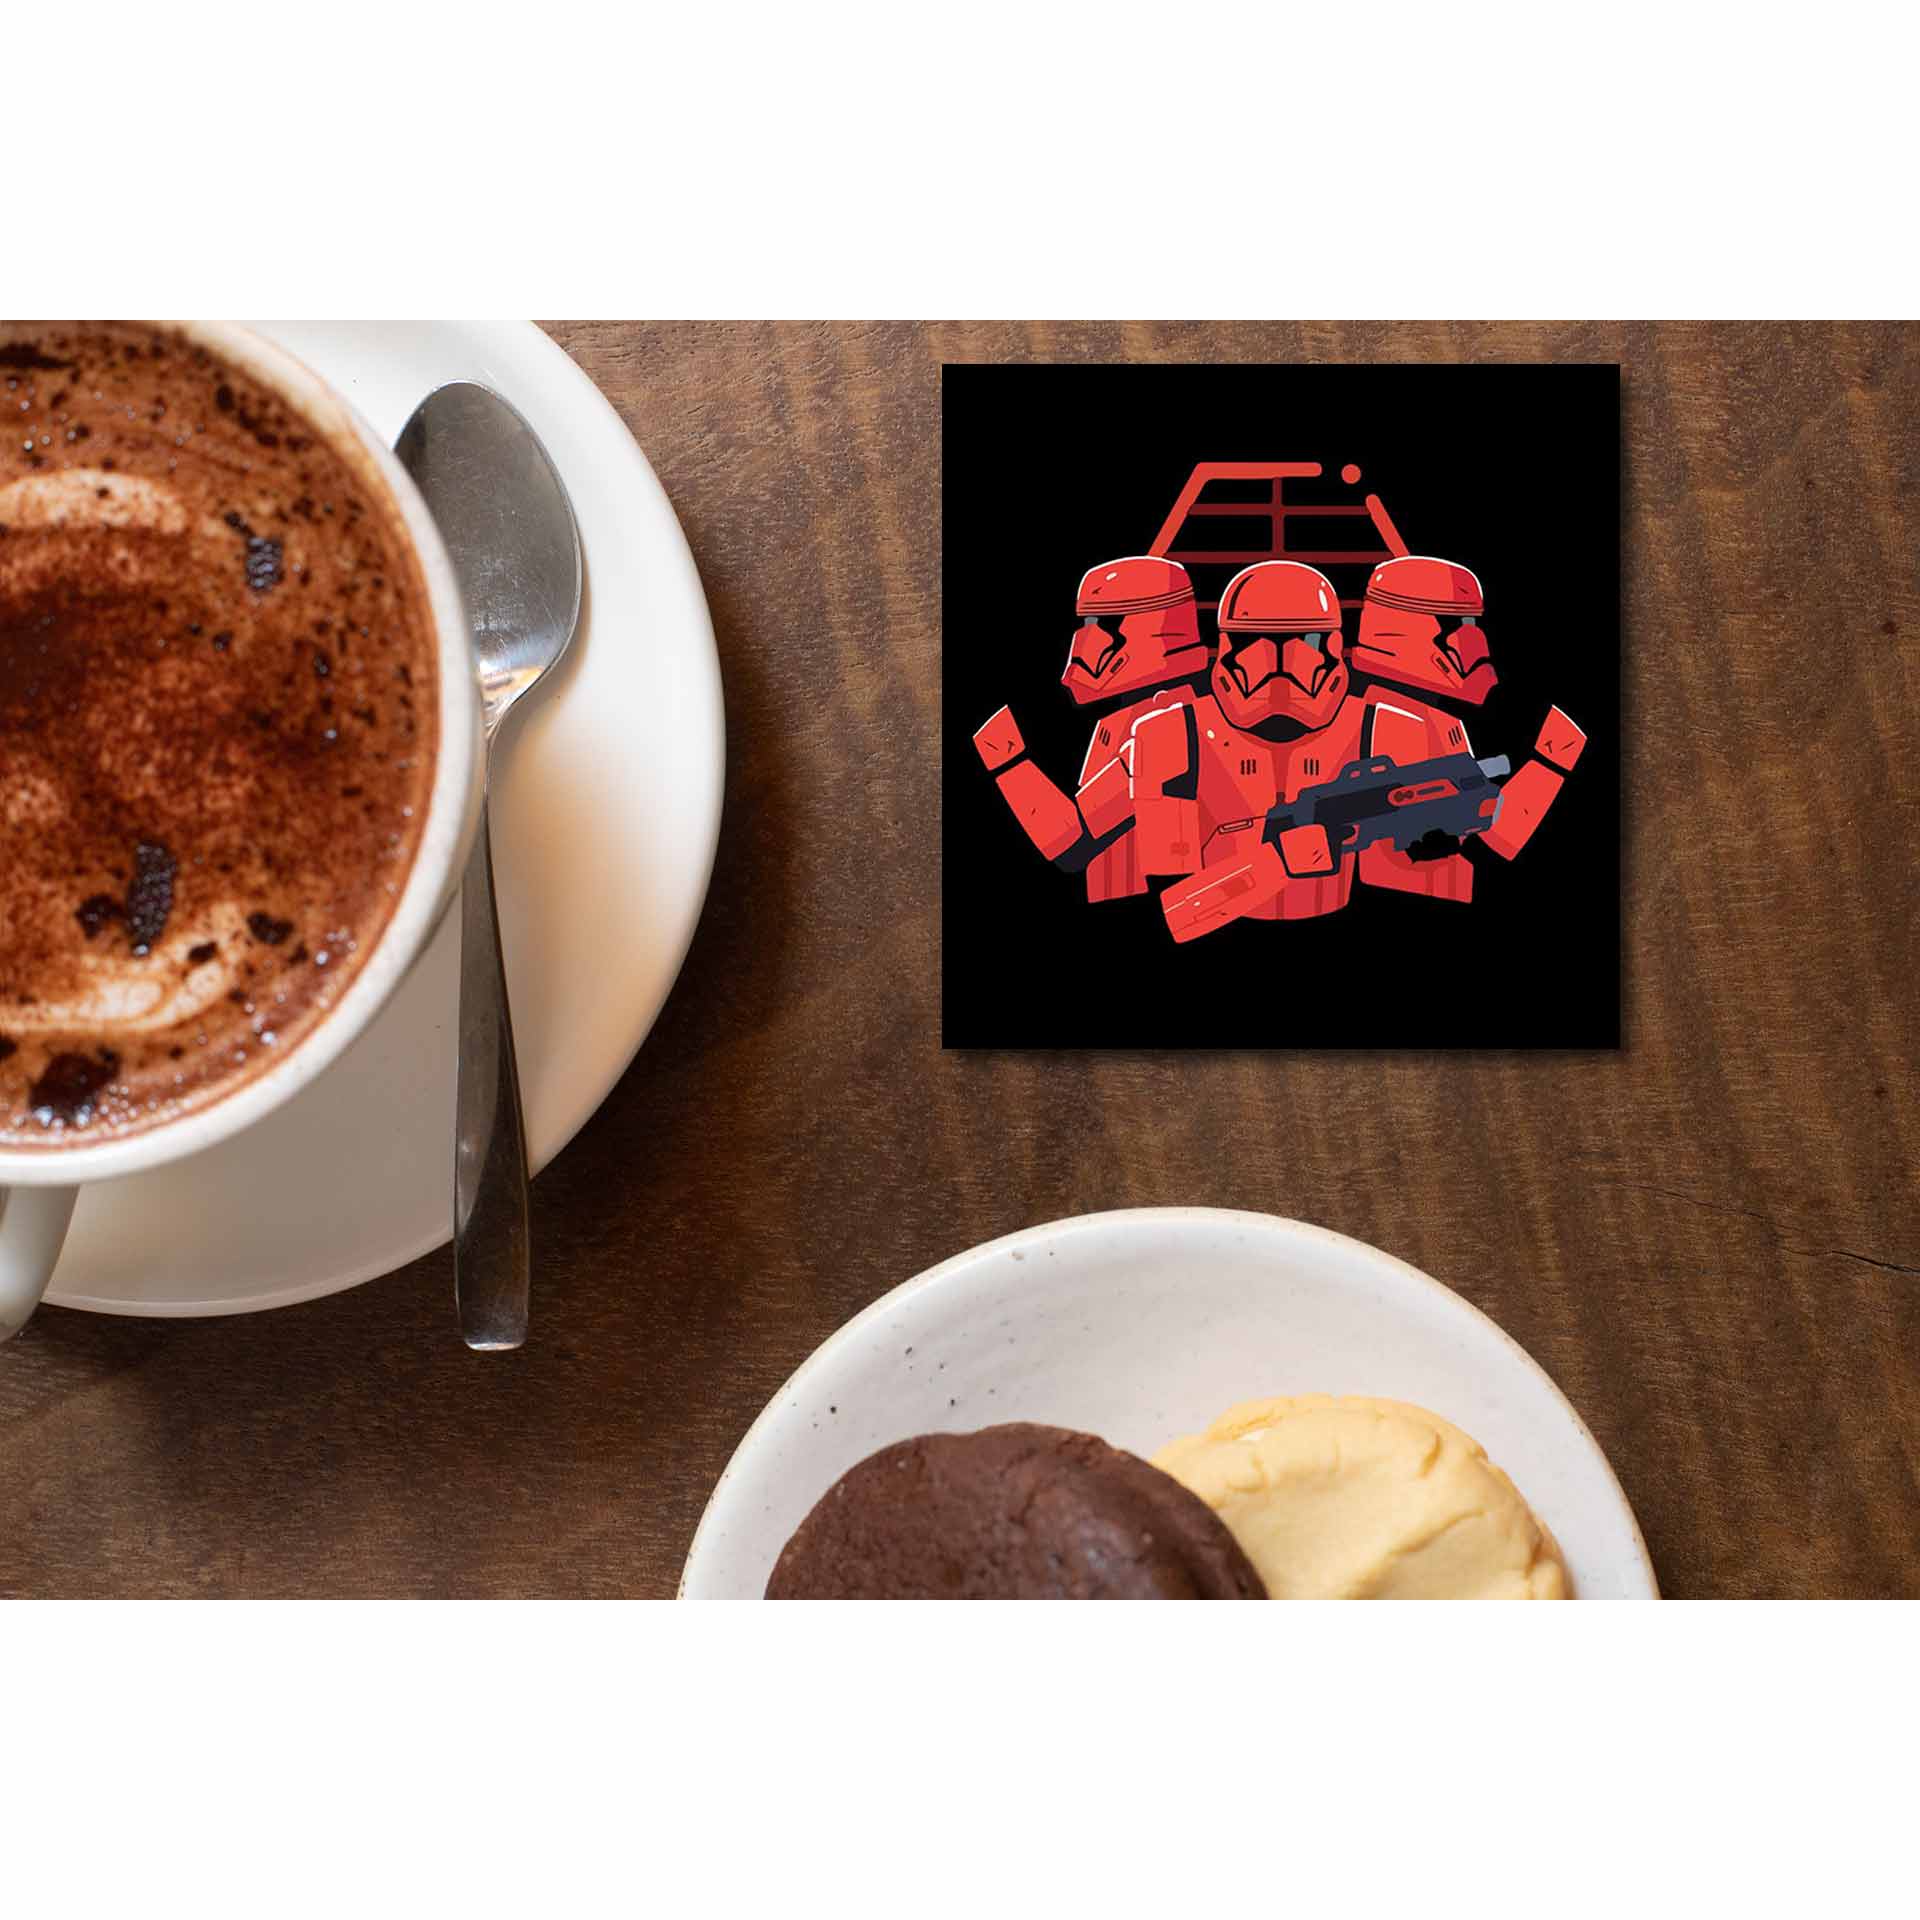 star wars stormtroopers coasters wooden table cups indian tv & movies buy online india the banyan tee tbt men women girls boys unisex